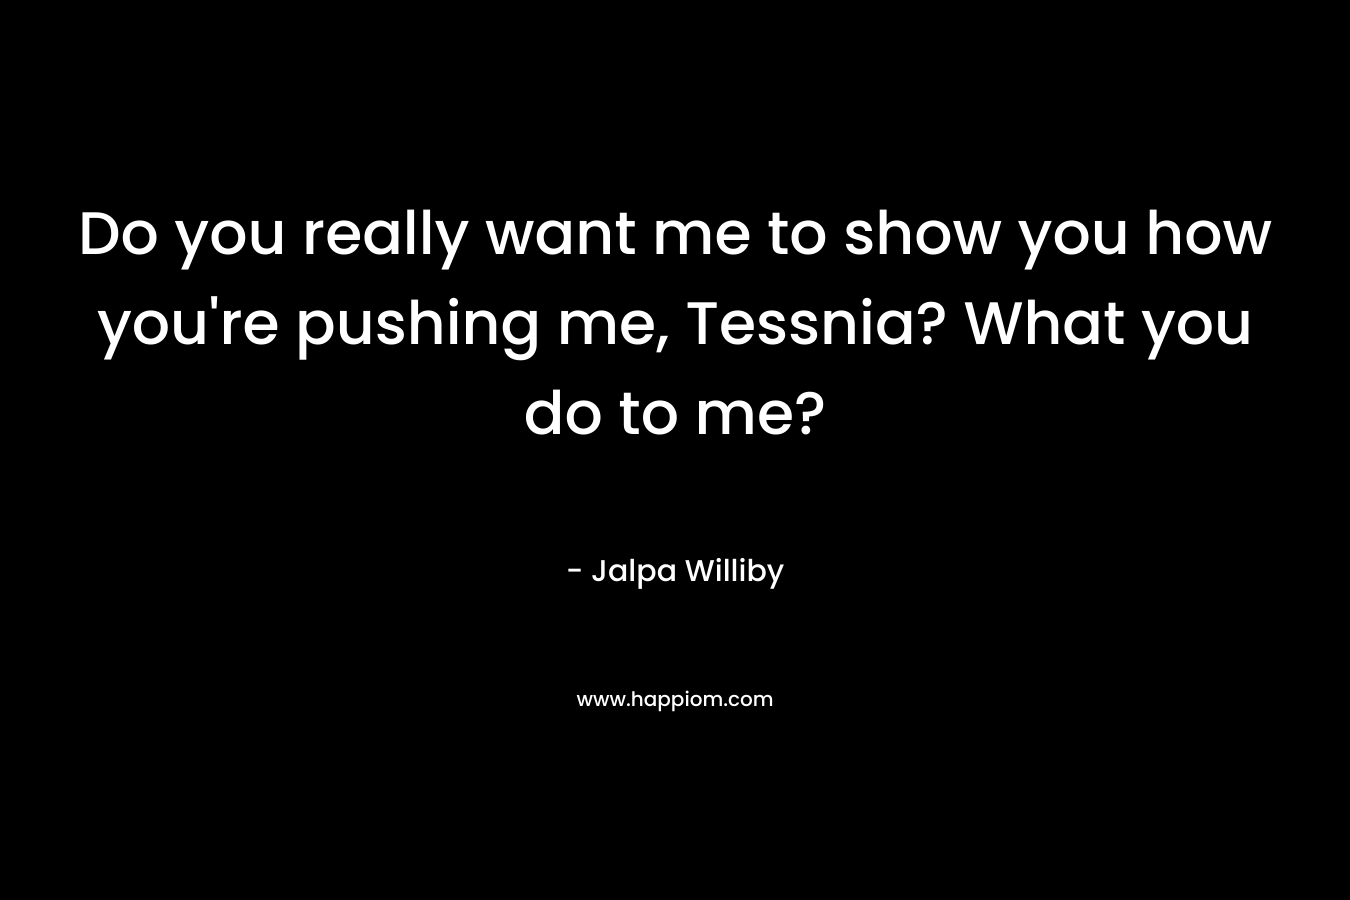 Do you really want me to show you how you’re pushing me, Tessnia? What you do to me? – Jalpa Williby